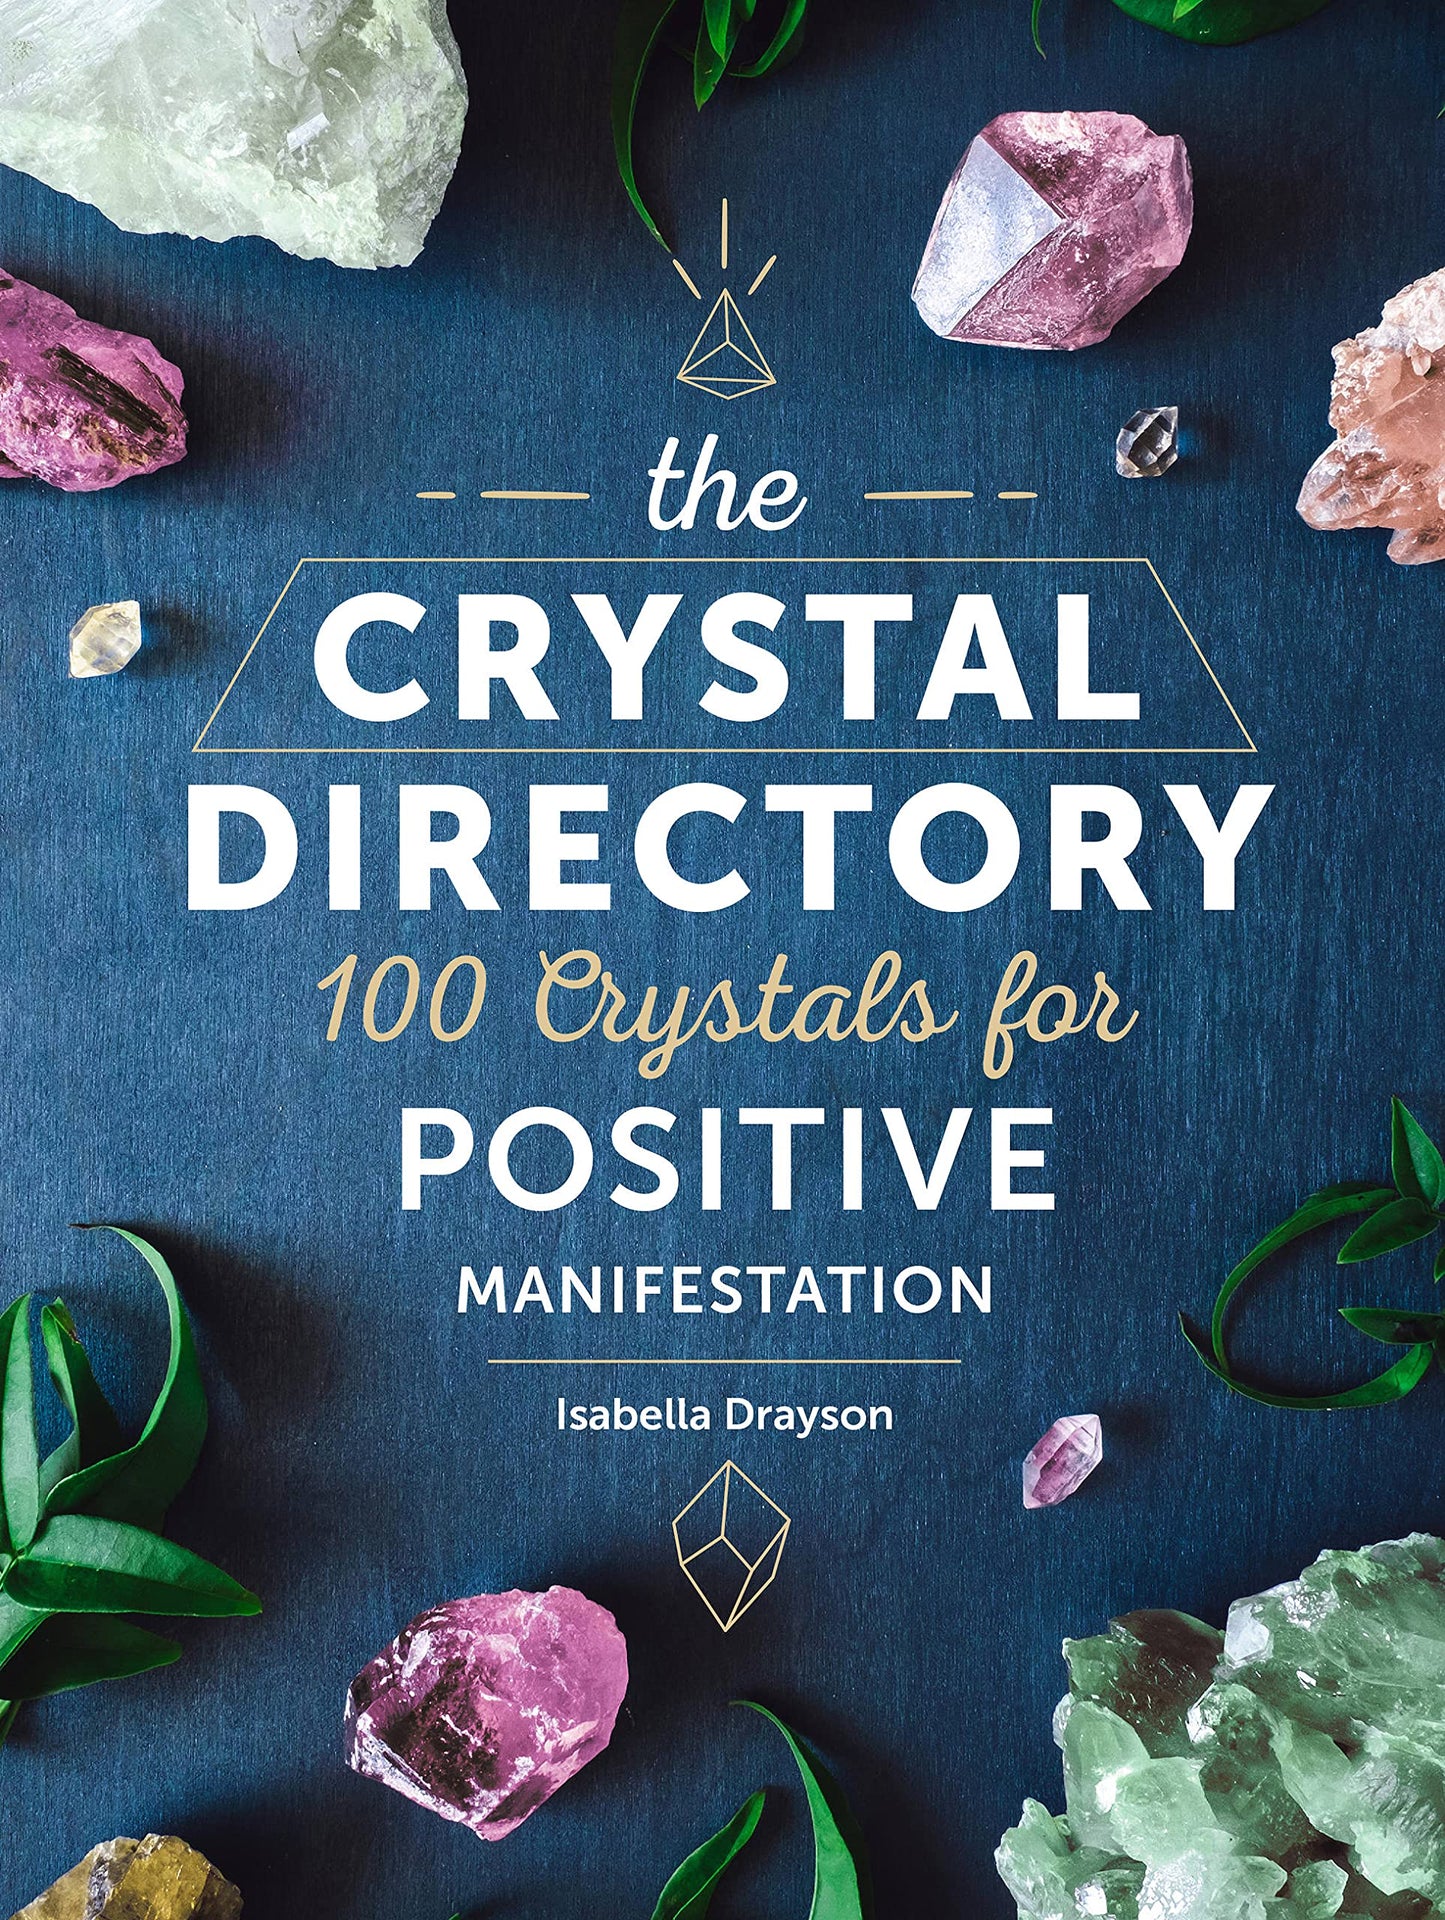 The Crystal Directory: 100 Crystals for Positive Manifestation (Volume 1) by Isabella Drayson (Author) Hardcover